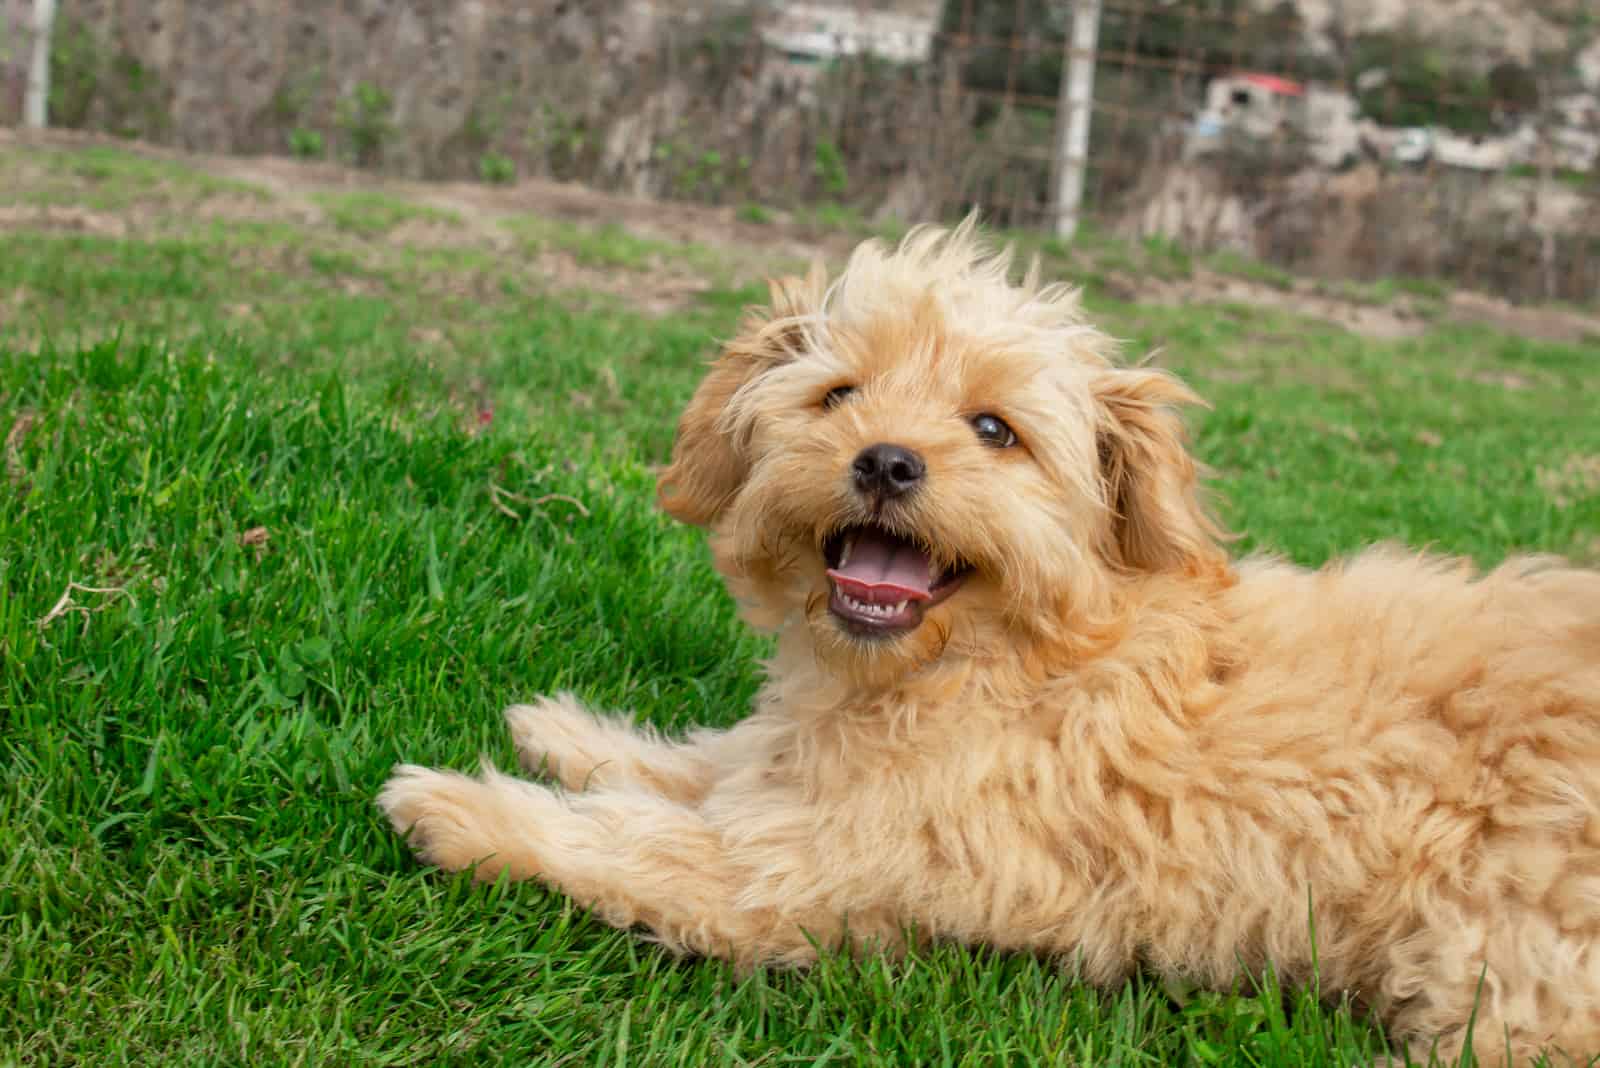 The Petite Goldendoodle: A Glimpse Of This Adorable Hybrid